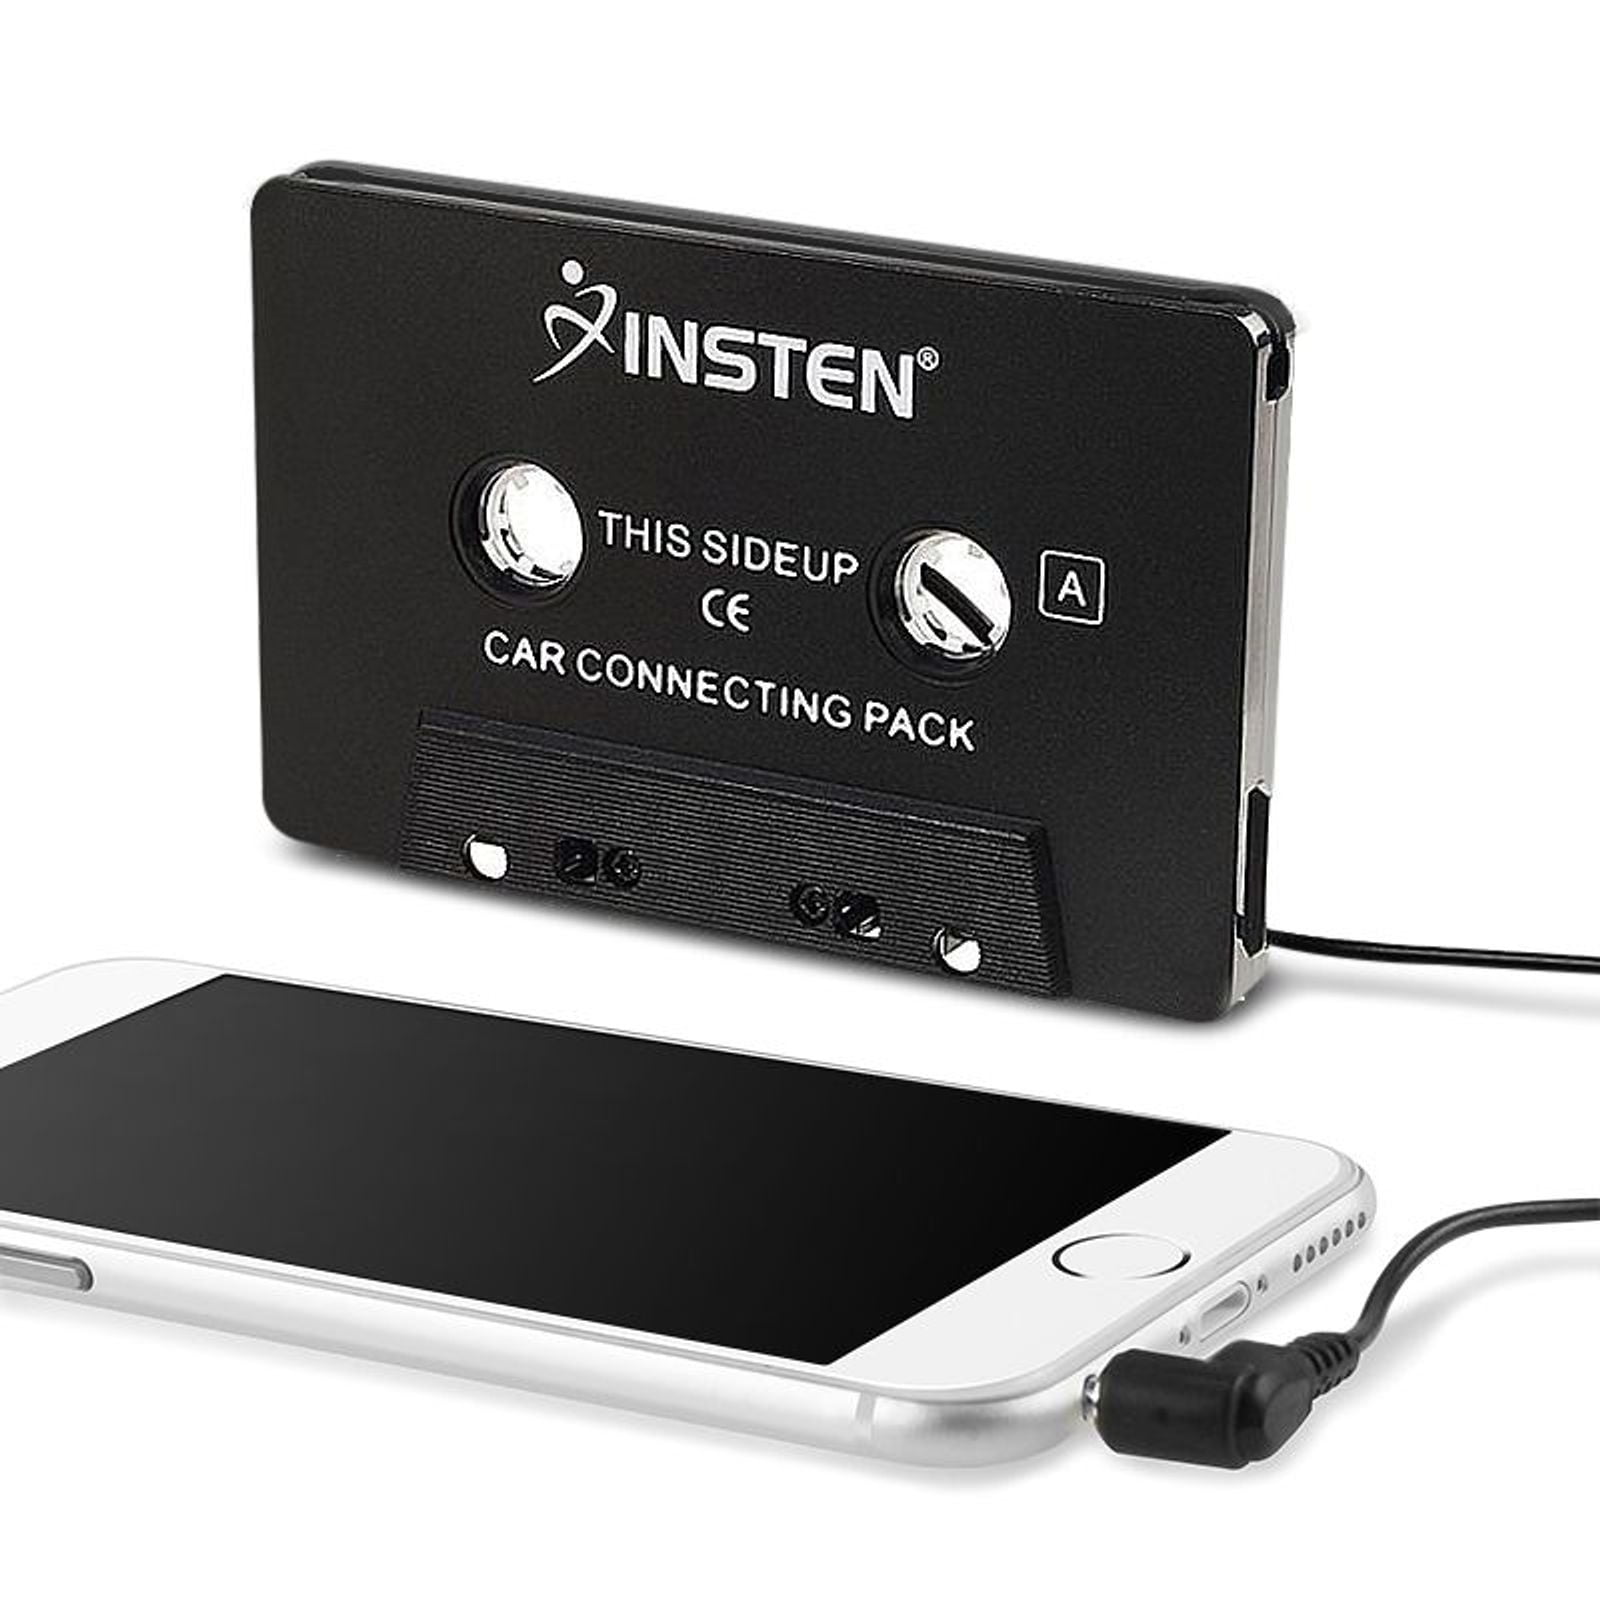 Insten Car Audio Aux Cassette Adapter with 3.5mm Cord, Black 